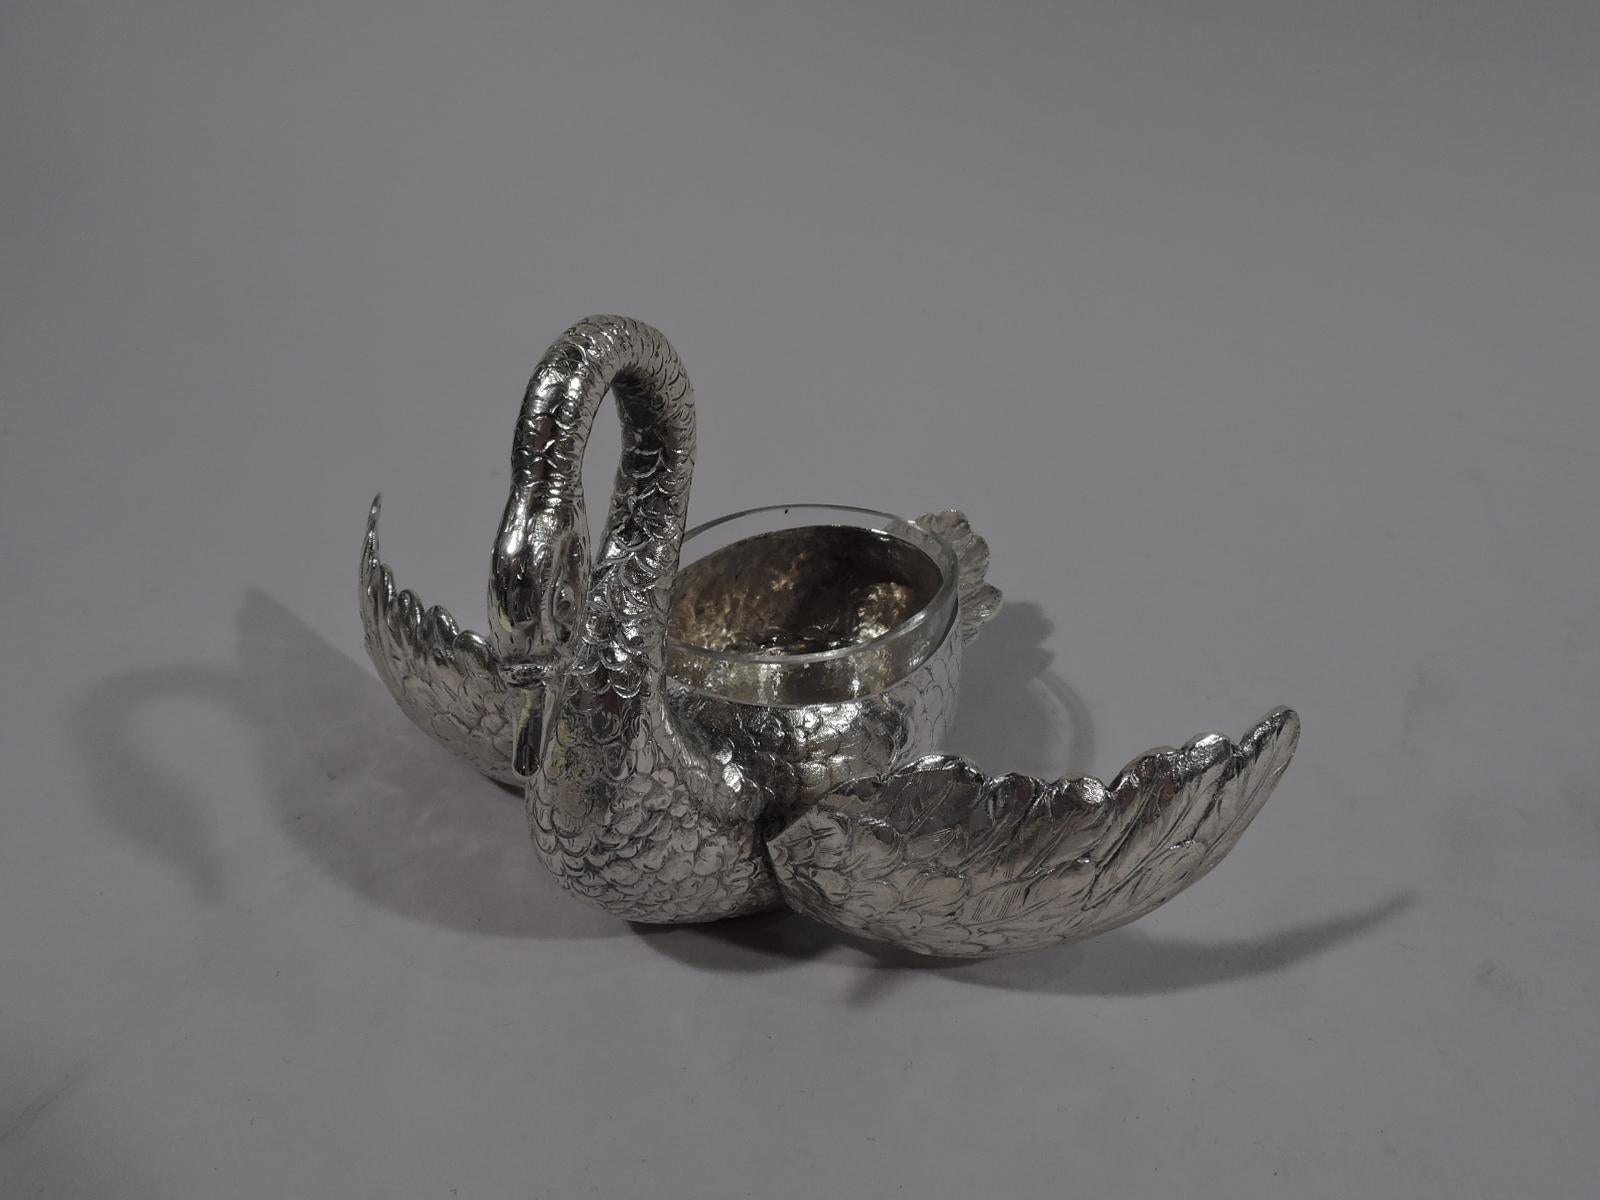 Pair of German 800 silver figural open salts, circa 1920. Each: A swan with hinged wings and erect tail. Nice plumage and scrolled neck terminating in triangular bill. With detachable clear glass liner. Marked.

Dimensions: H 3 1/2 x W 2 1/4 x D 4